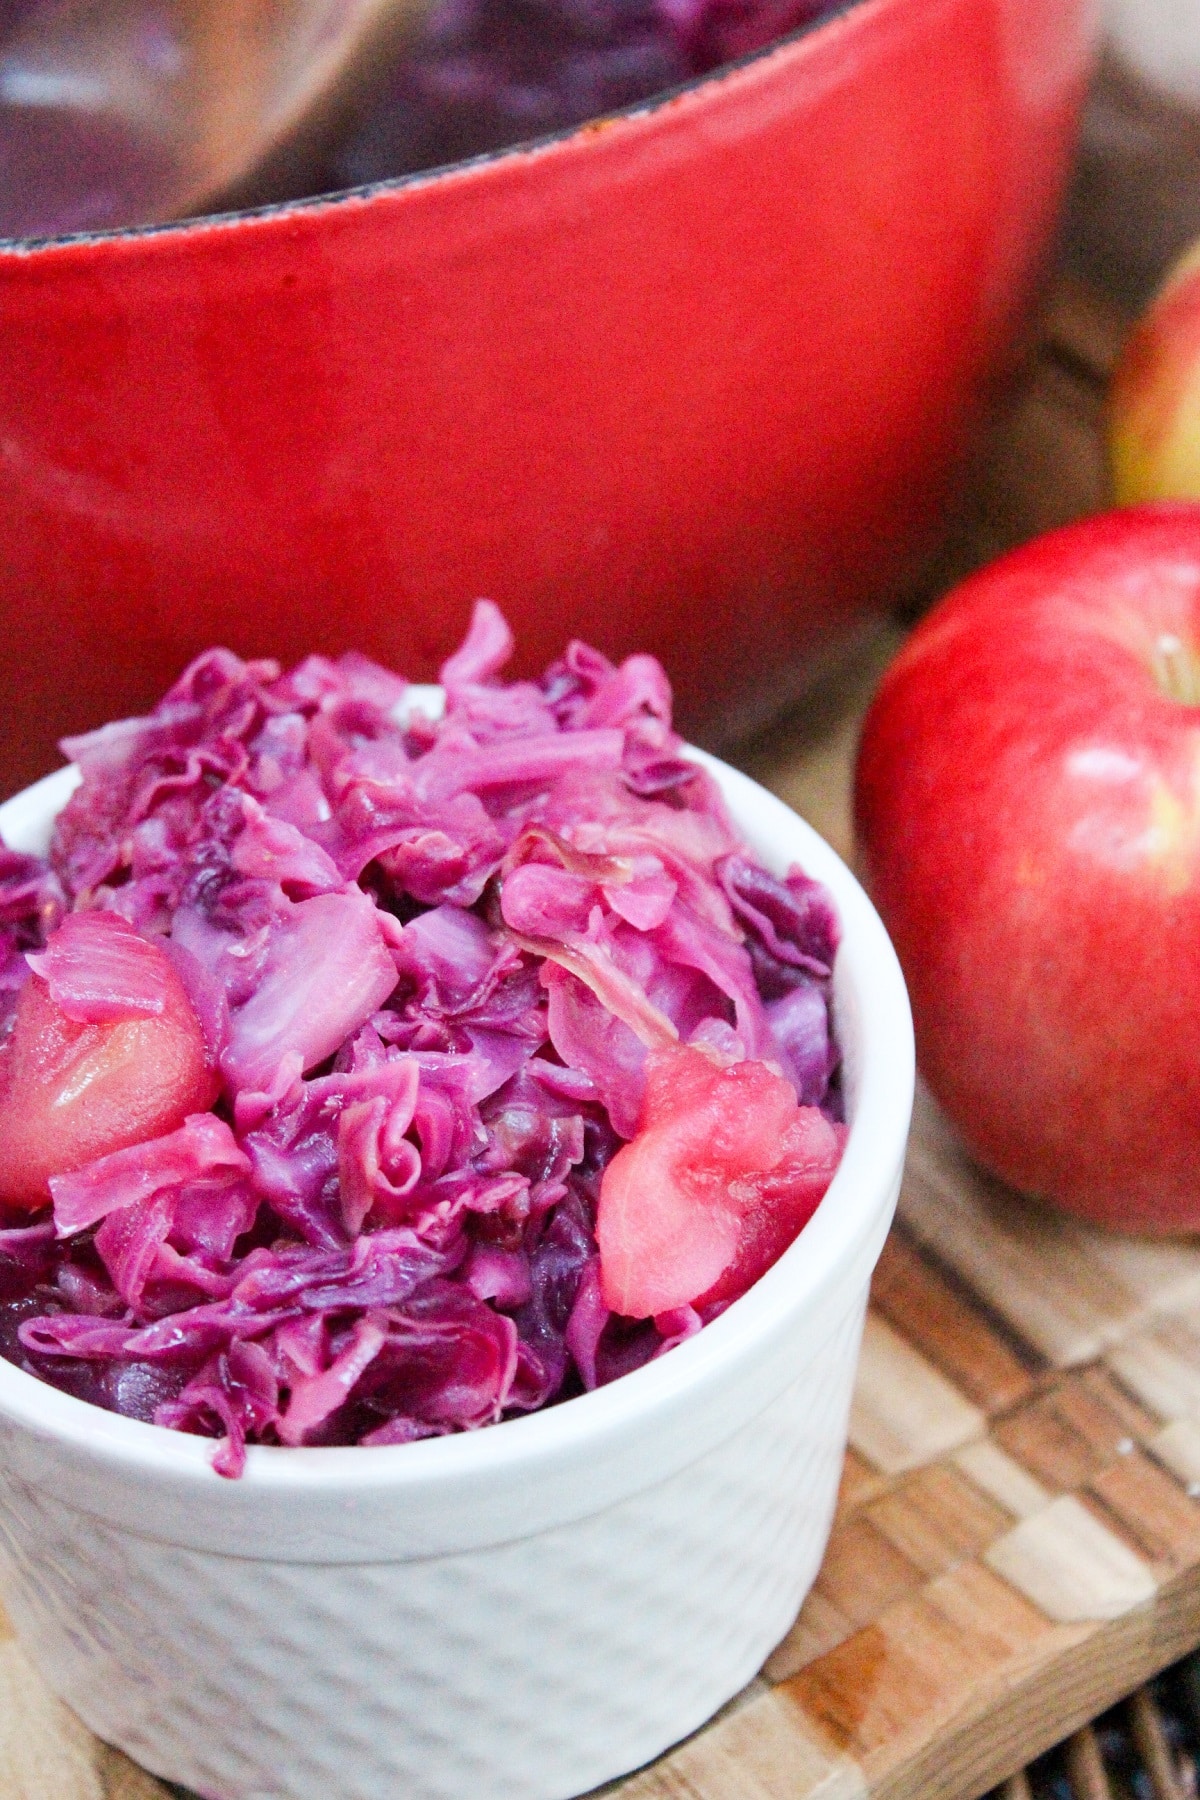 chopped red cabbage and apples in a small white dish.